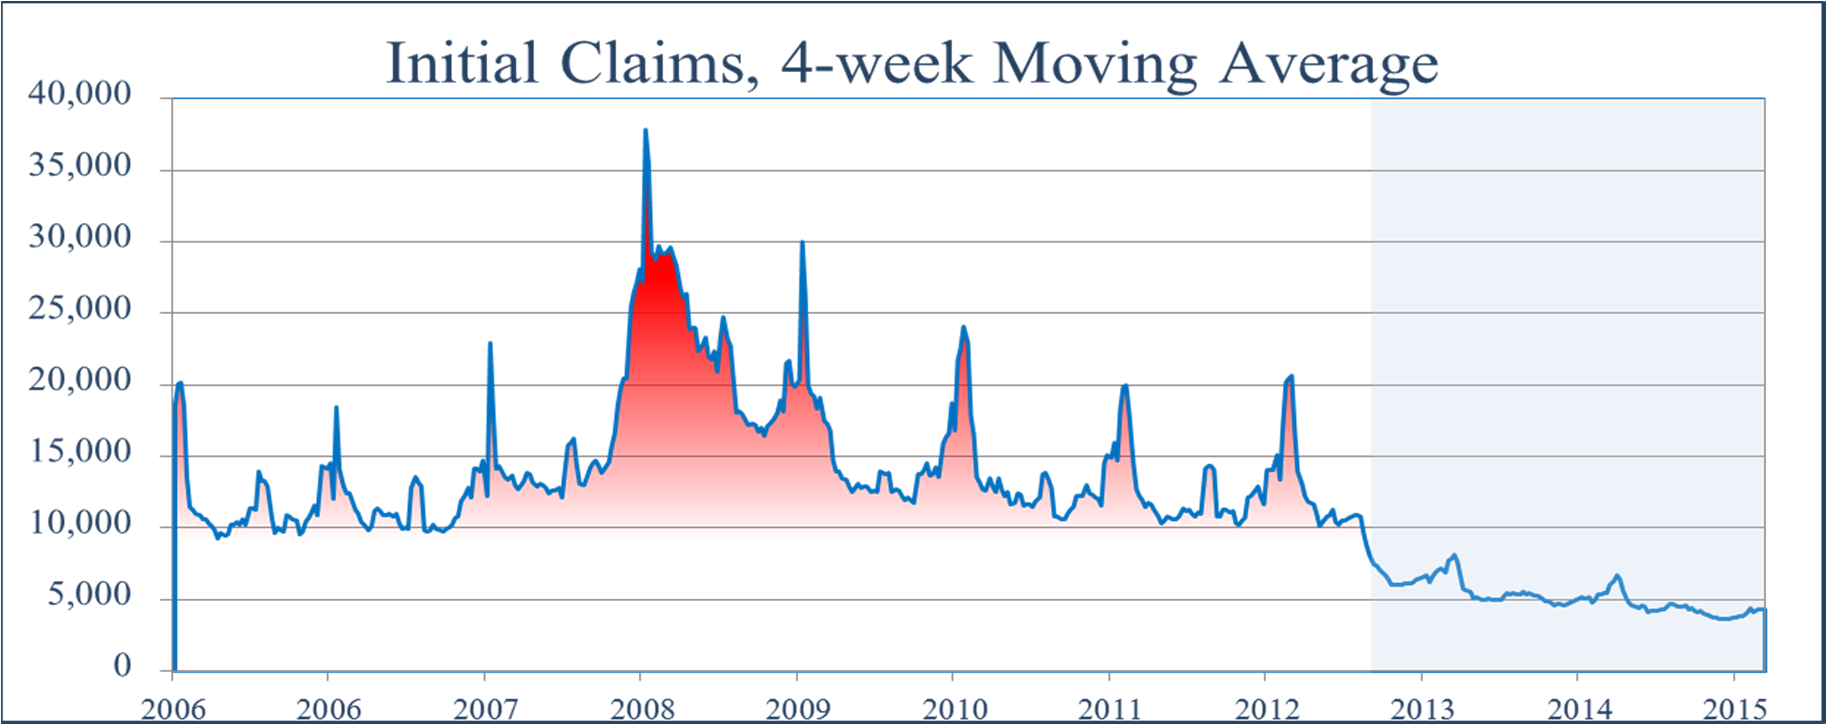 Economic Outlook Shaded area indicates initial claims after policy changes enacted in 2013. Initial jobless claims (i.e., new claims from job losses) are a leading indicator of where the economy is headed and are related to the unemployment rate, which was 5.